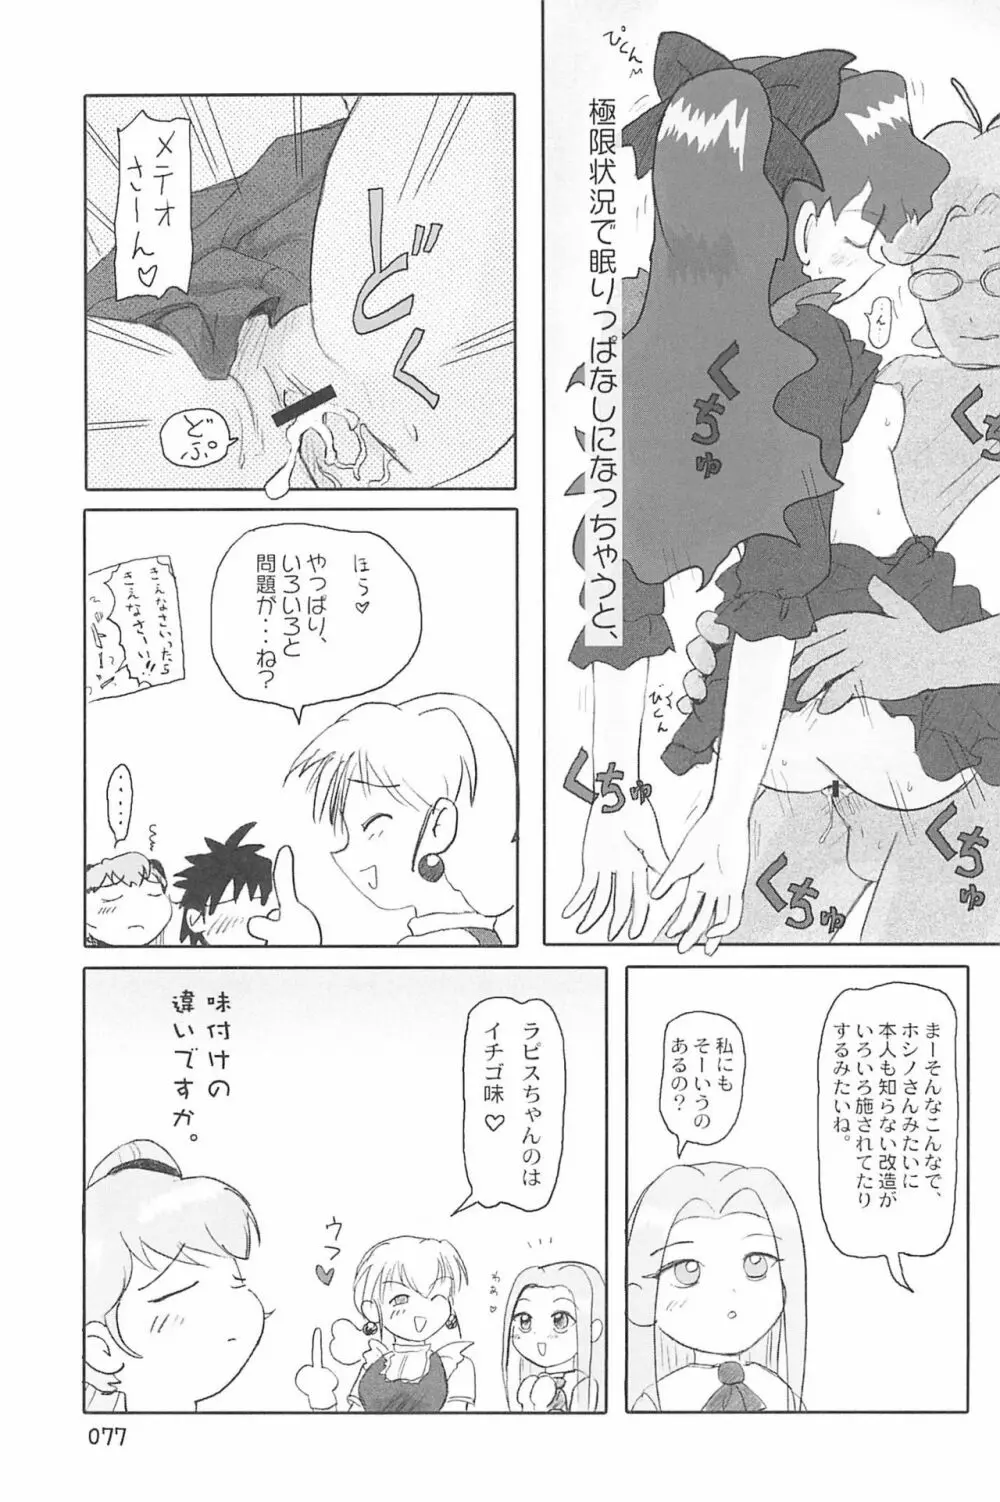 ND-special Volume 4 77ページ